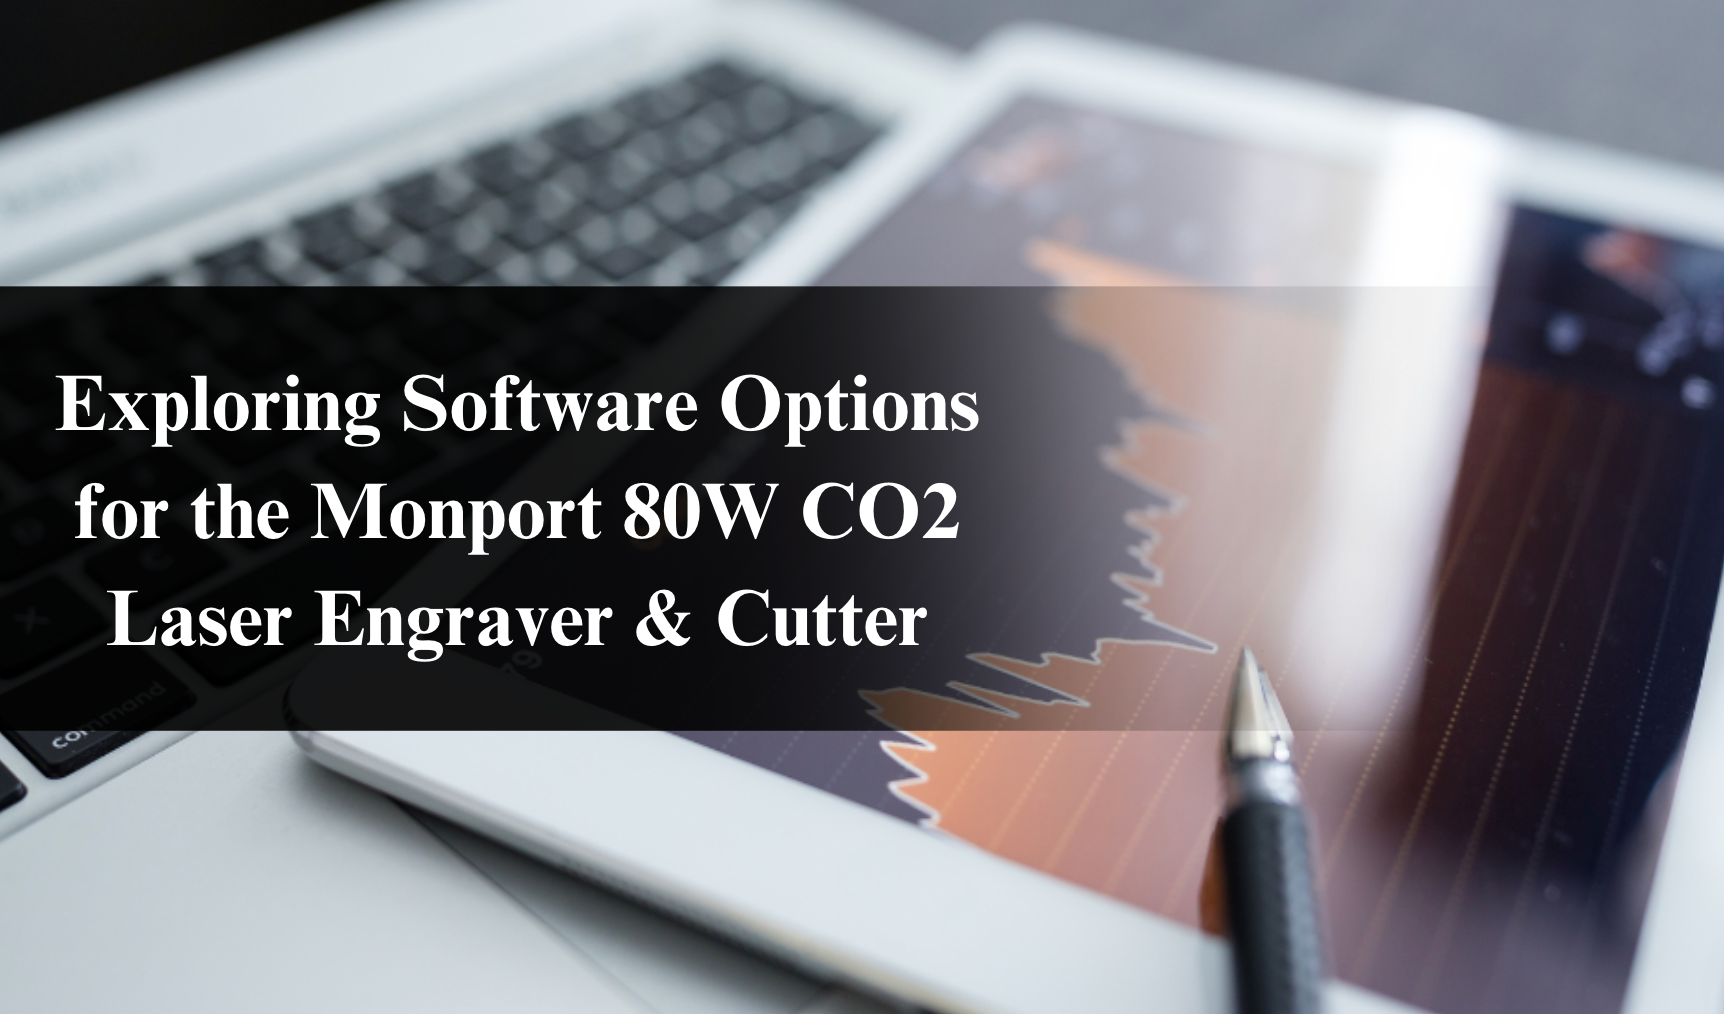 Exploring Software Options for the Monport 80W CO2 Laser Engraver & Cutter